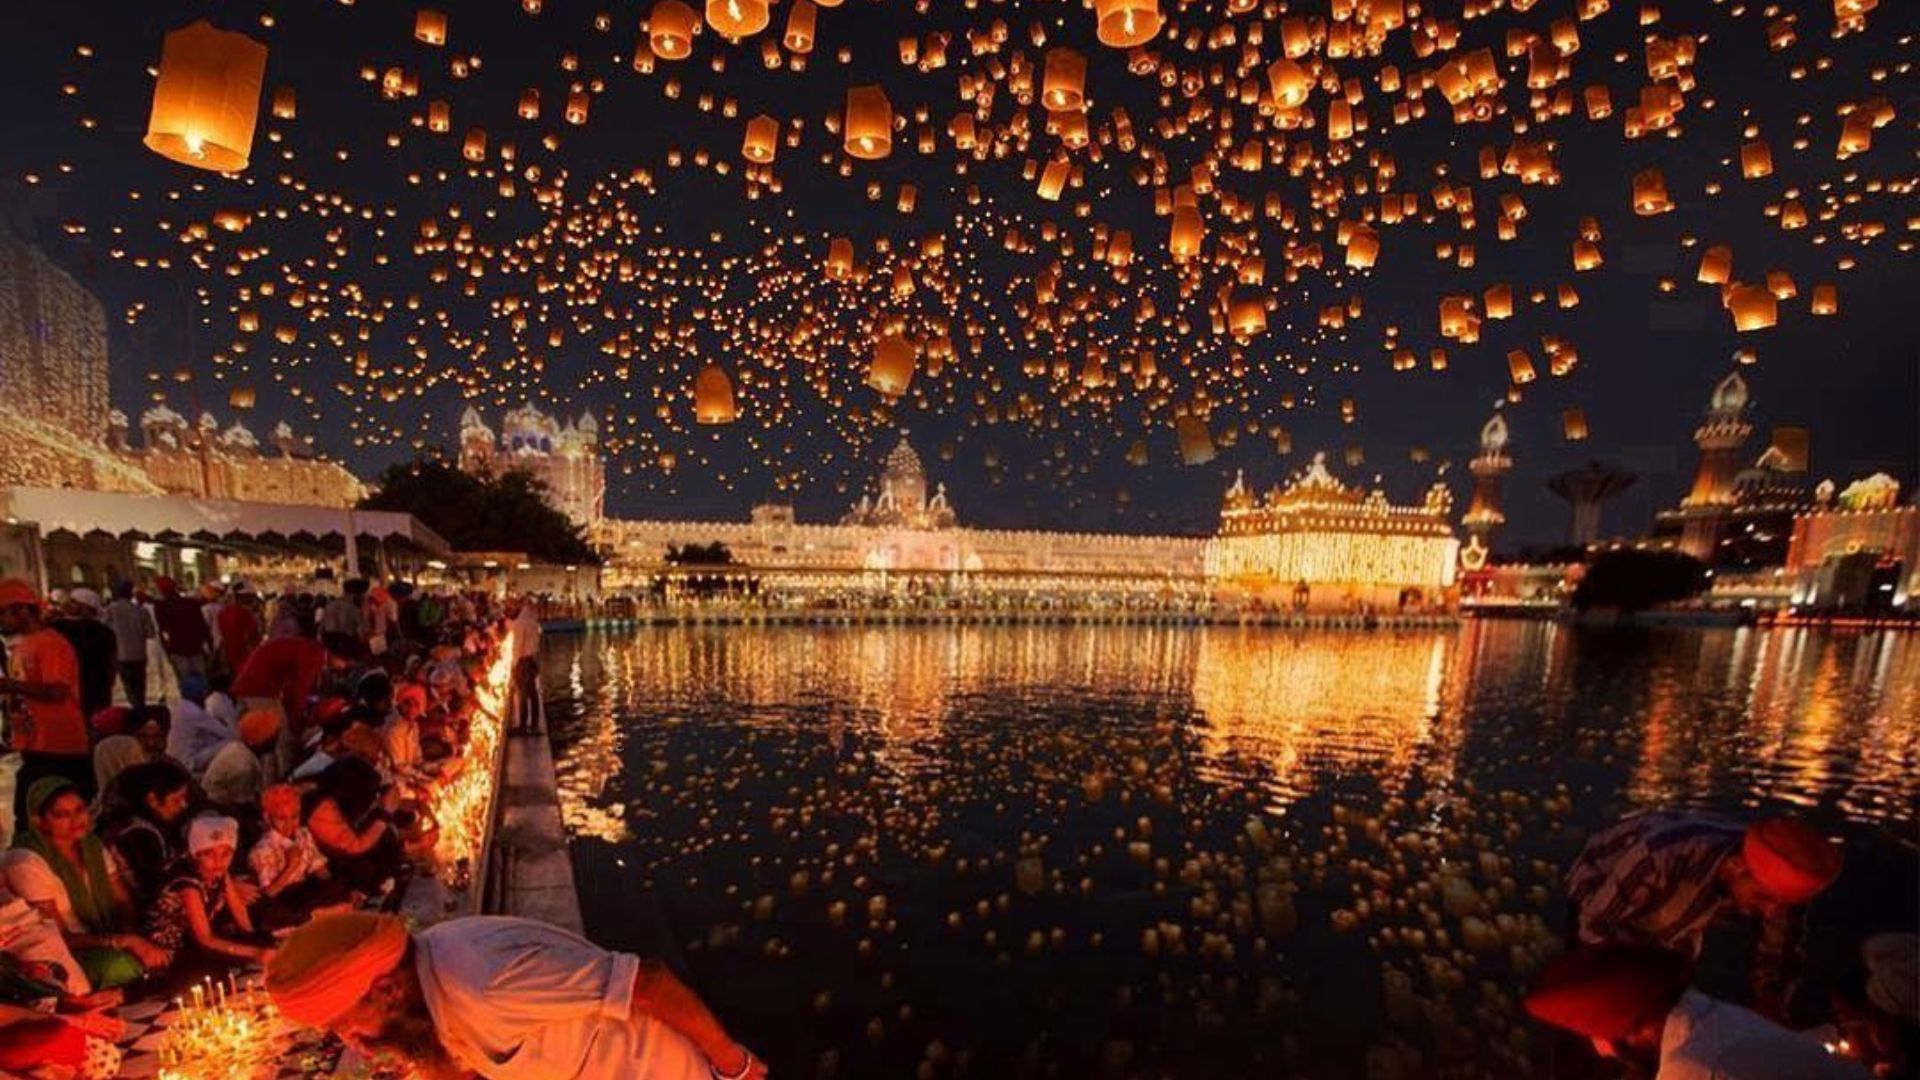 Diwali celebrations Here are some unique ways this festival is observed